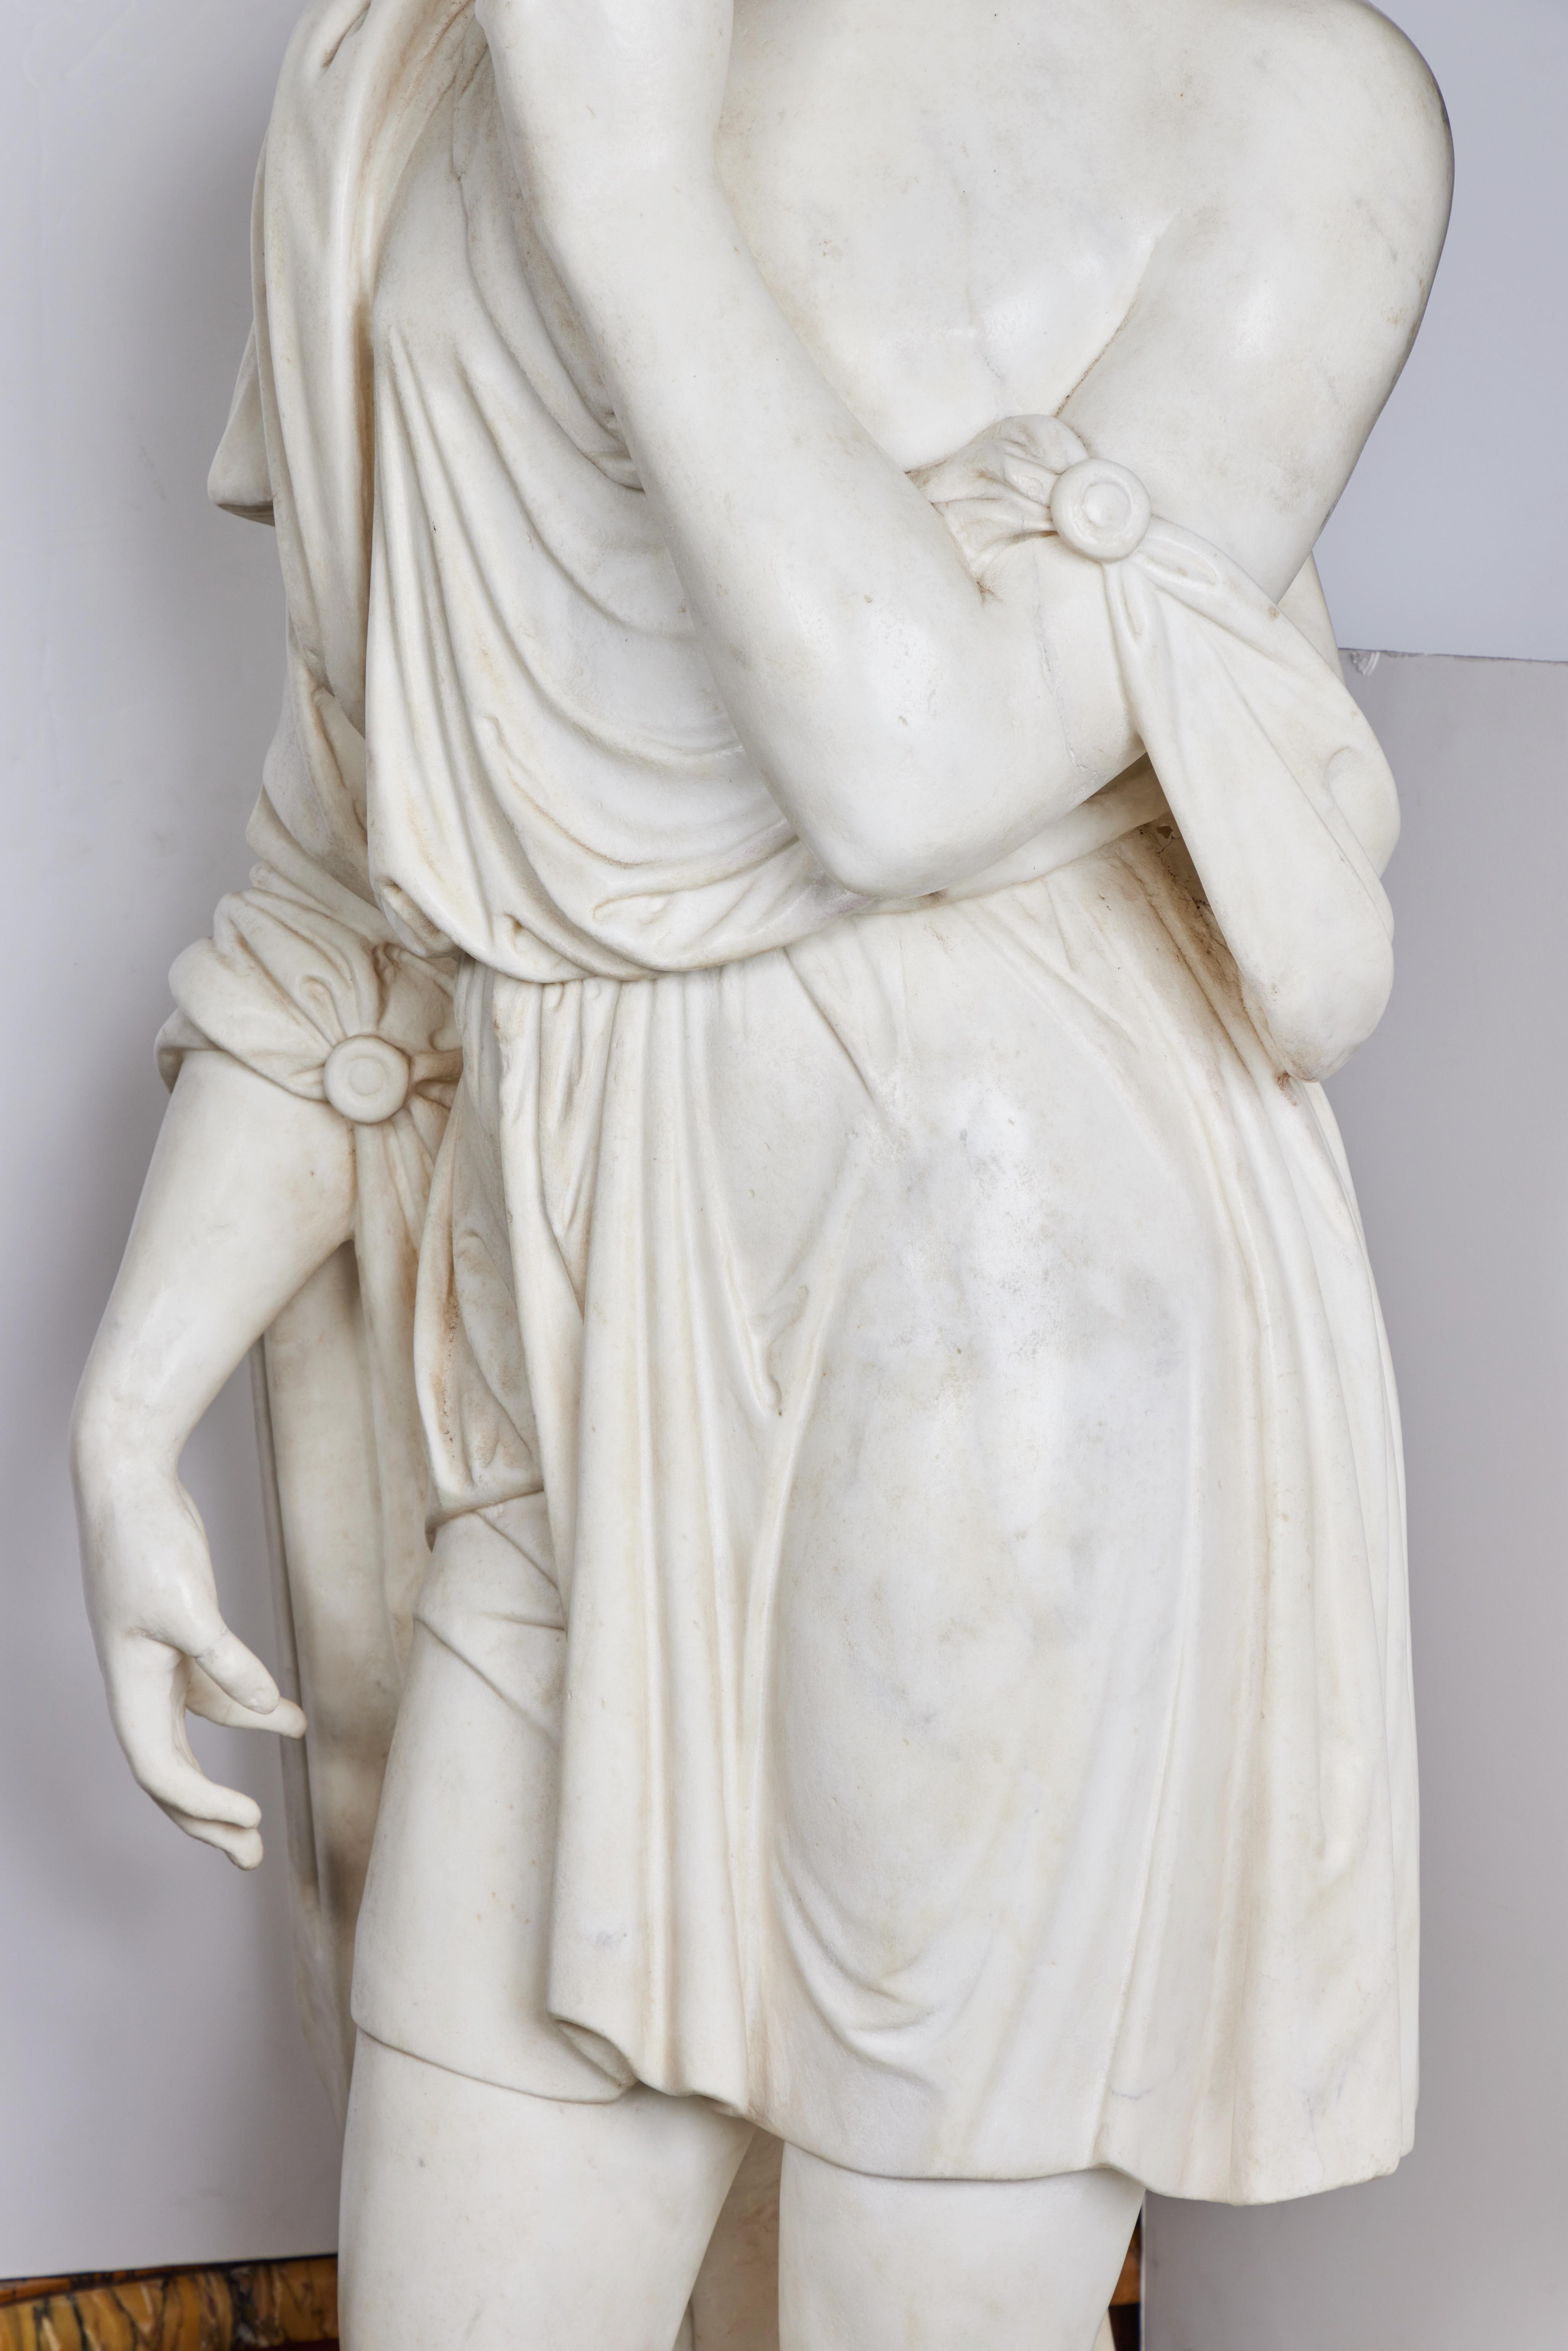 Neoclassical Life Size Roman Marble Figure